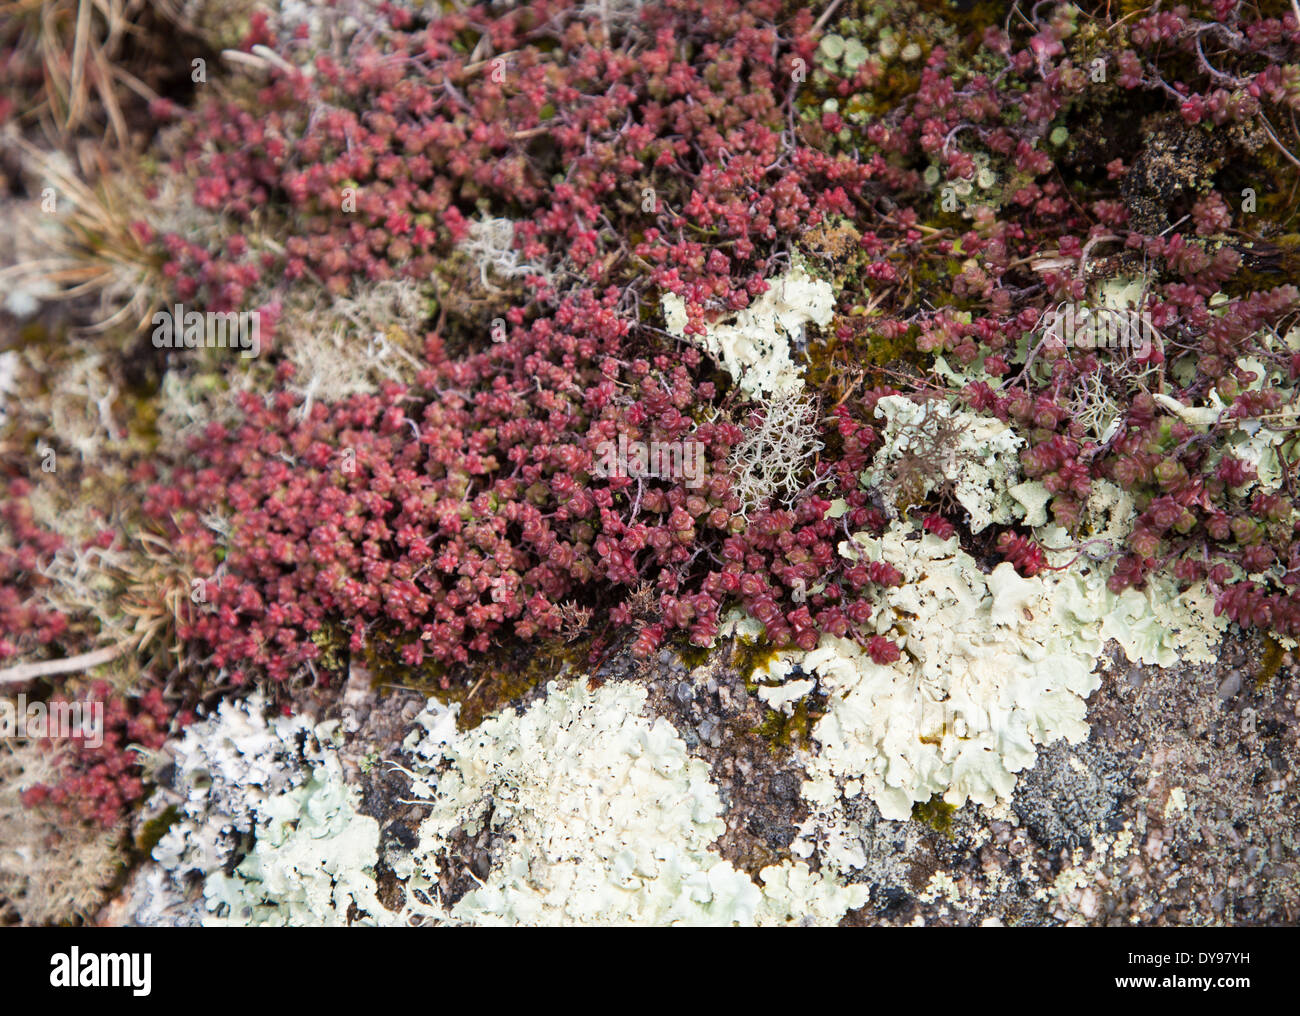 English Stonecrop (Sedum anglicum), a low growing saxifrage plant and Lichen on a rock Stock Photo